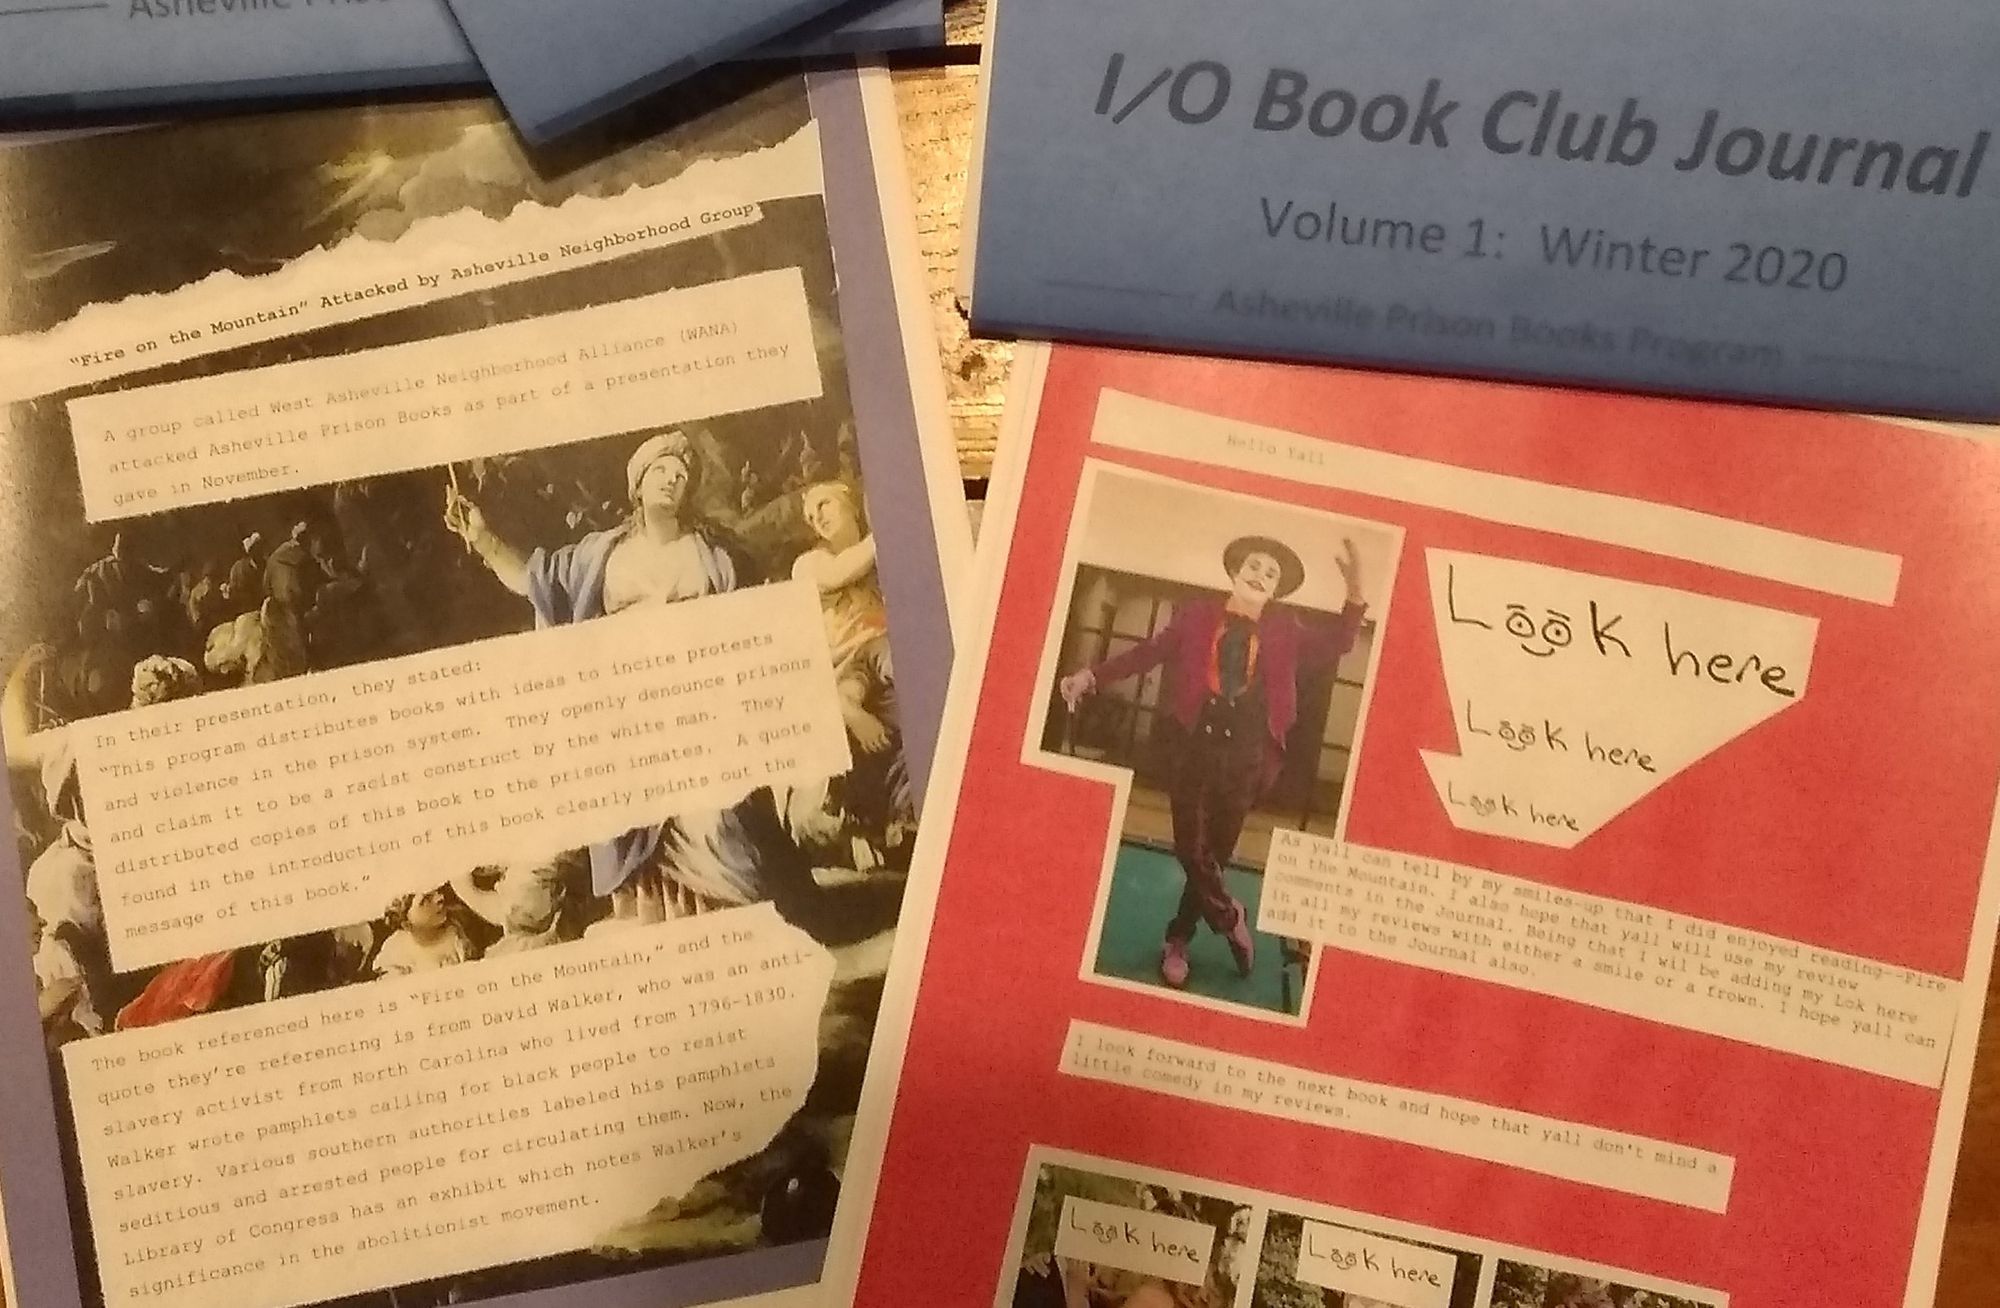 First-ever I/O Book Club Journal Released!